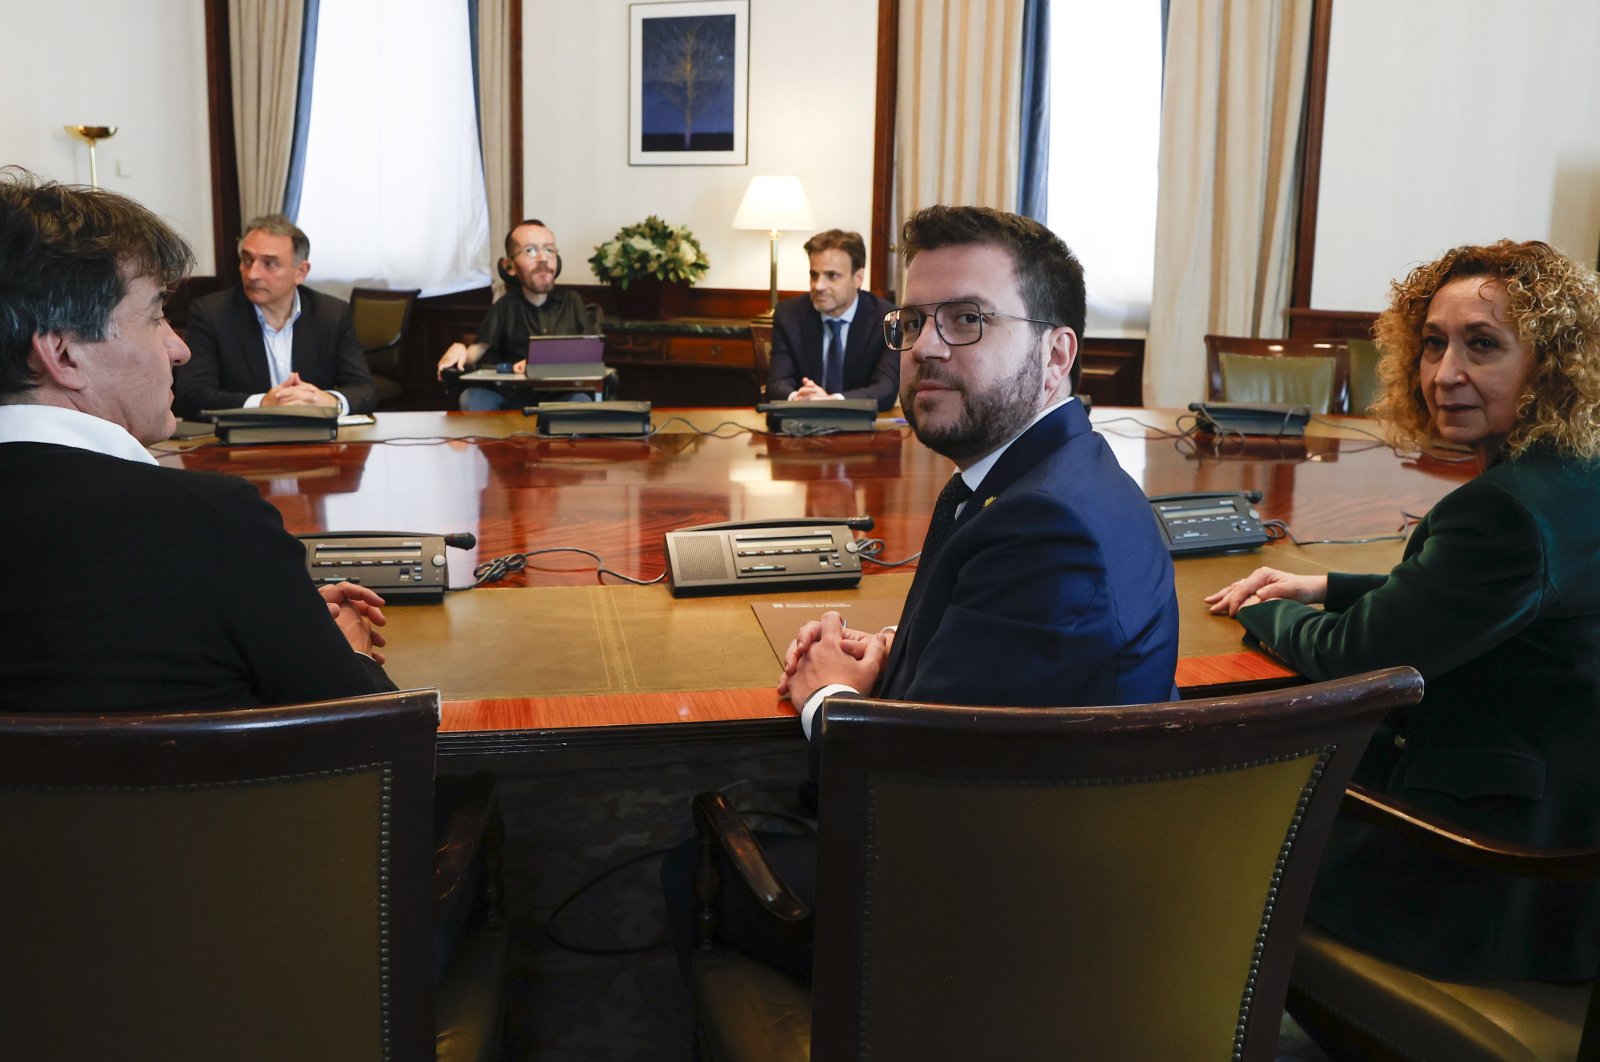 Catalonian regional President Pere Aragones (2-R) poses as he meets with several members of parliament at the Lower Chamber of Spanish Parliament, Madrid, Spain, April 21, 2022. (EPA Photo)